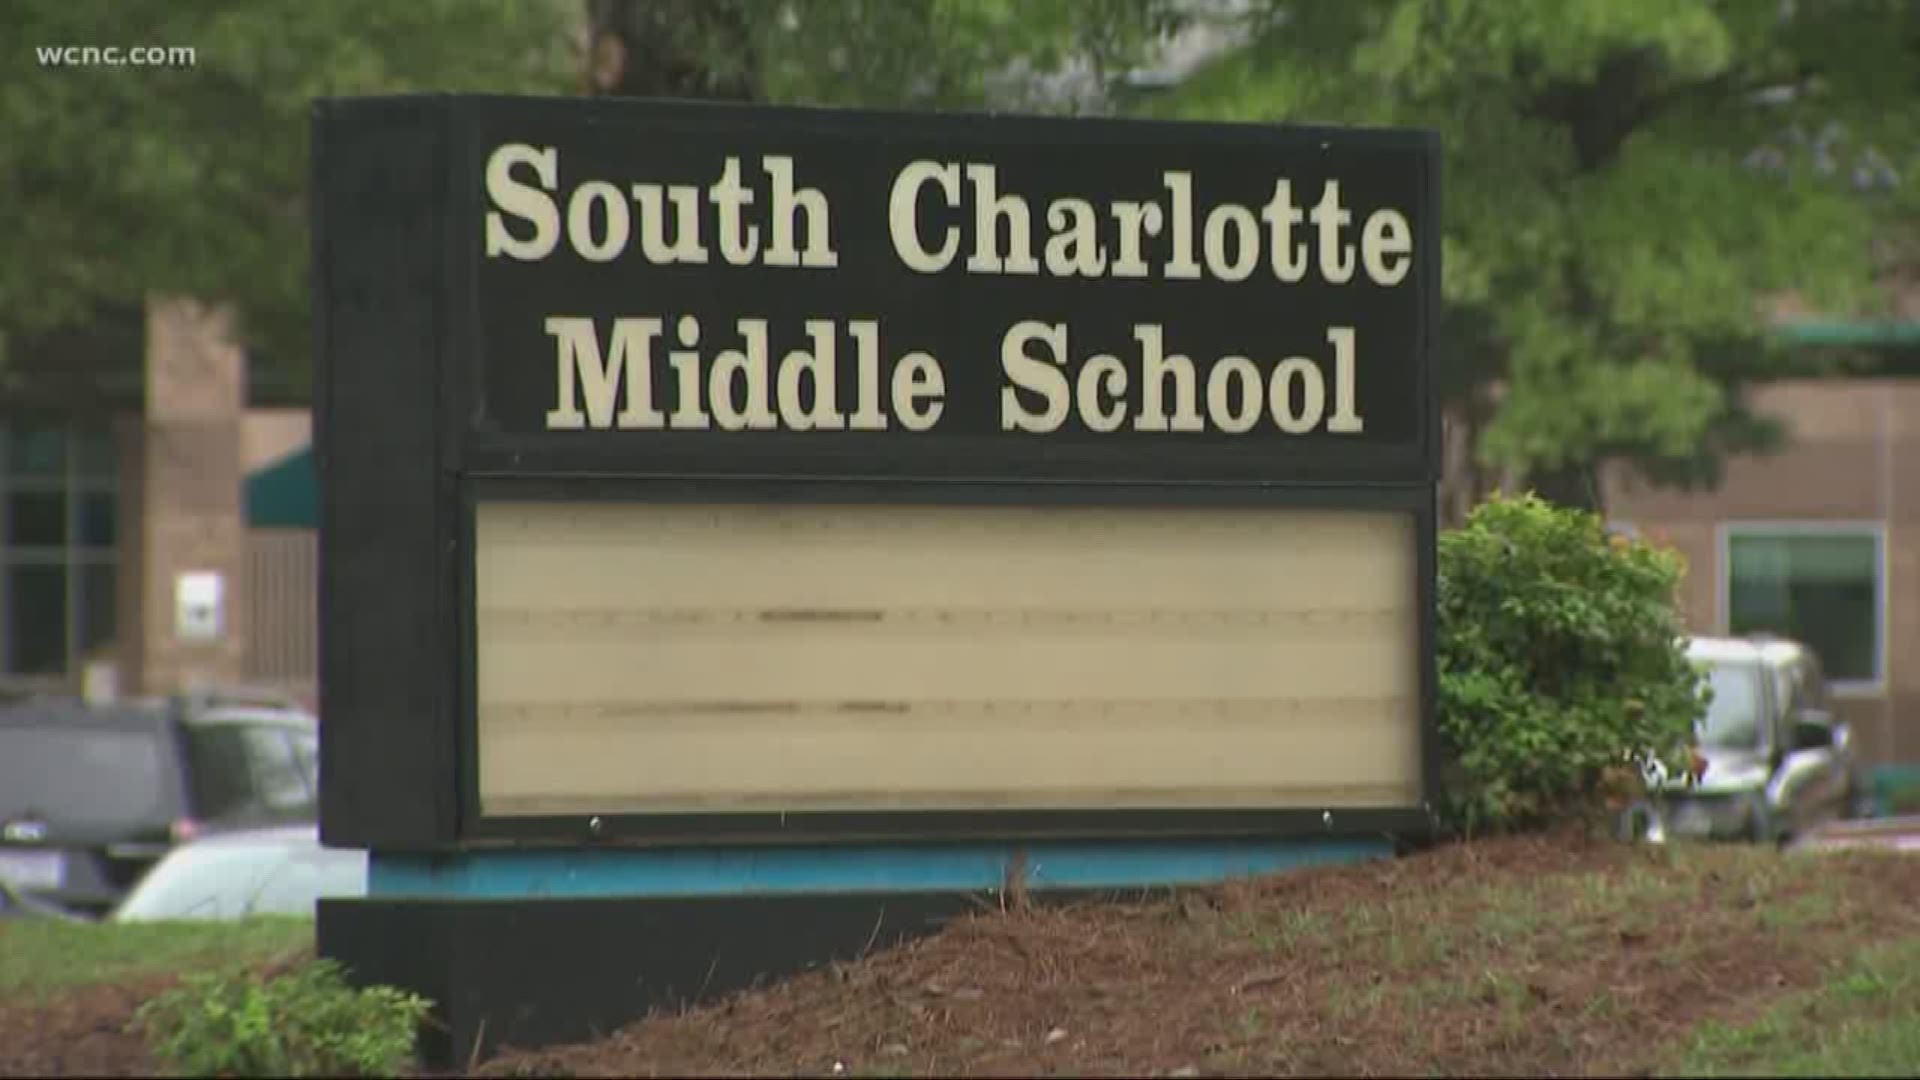 A photo making the rounds on social media shows a vulgar message outside South Charlotte Middle School. School leaders respond to the public response.